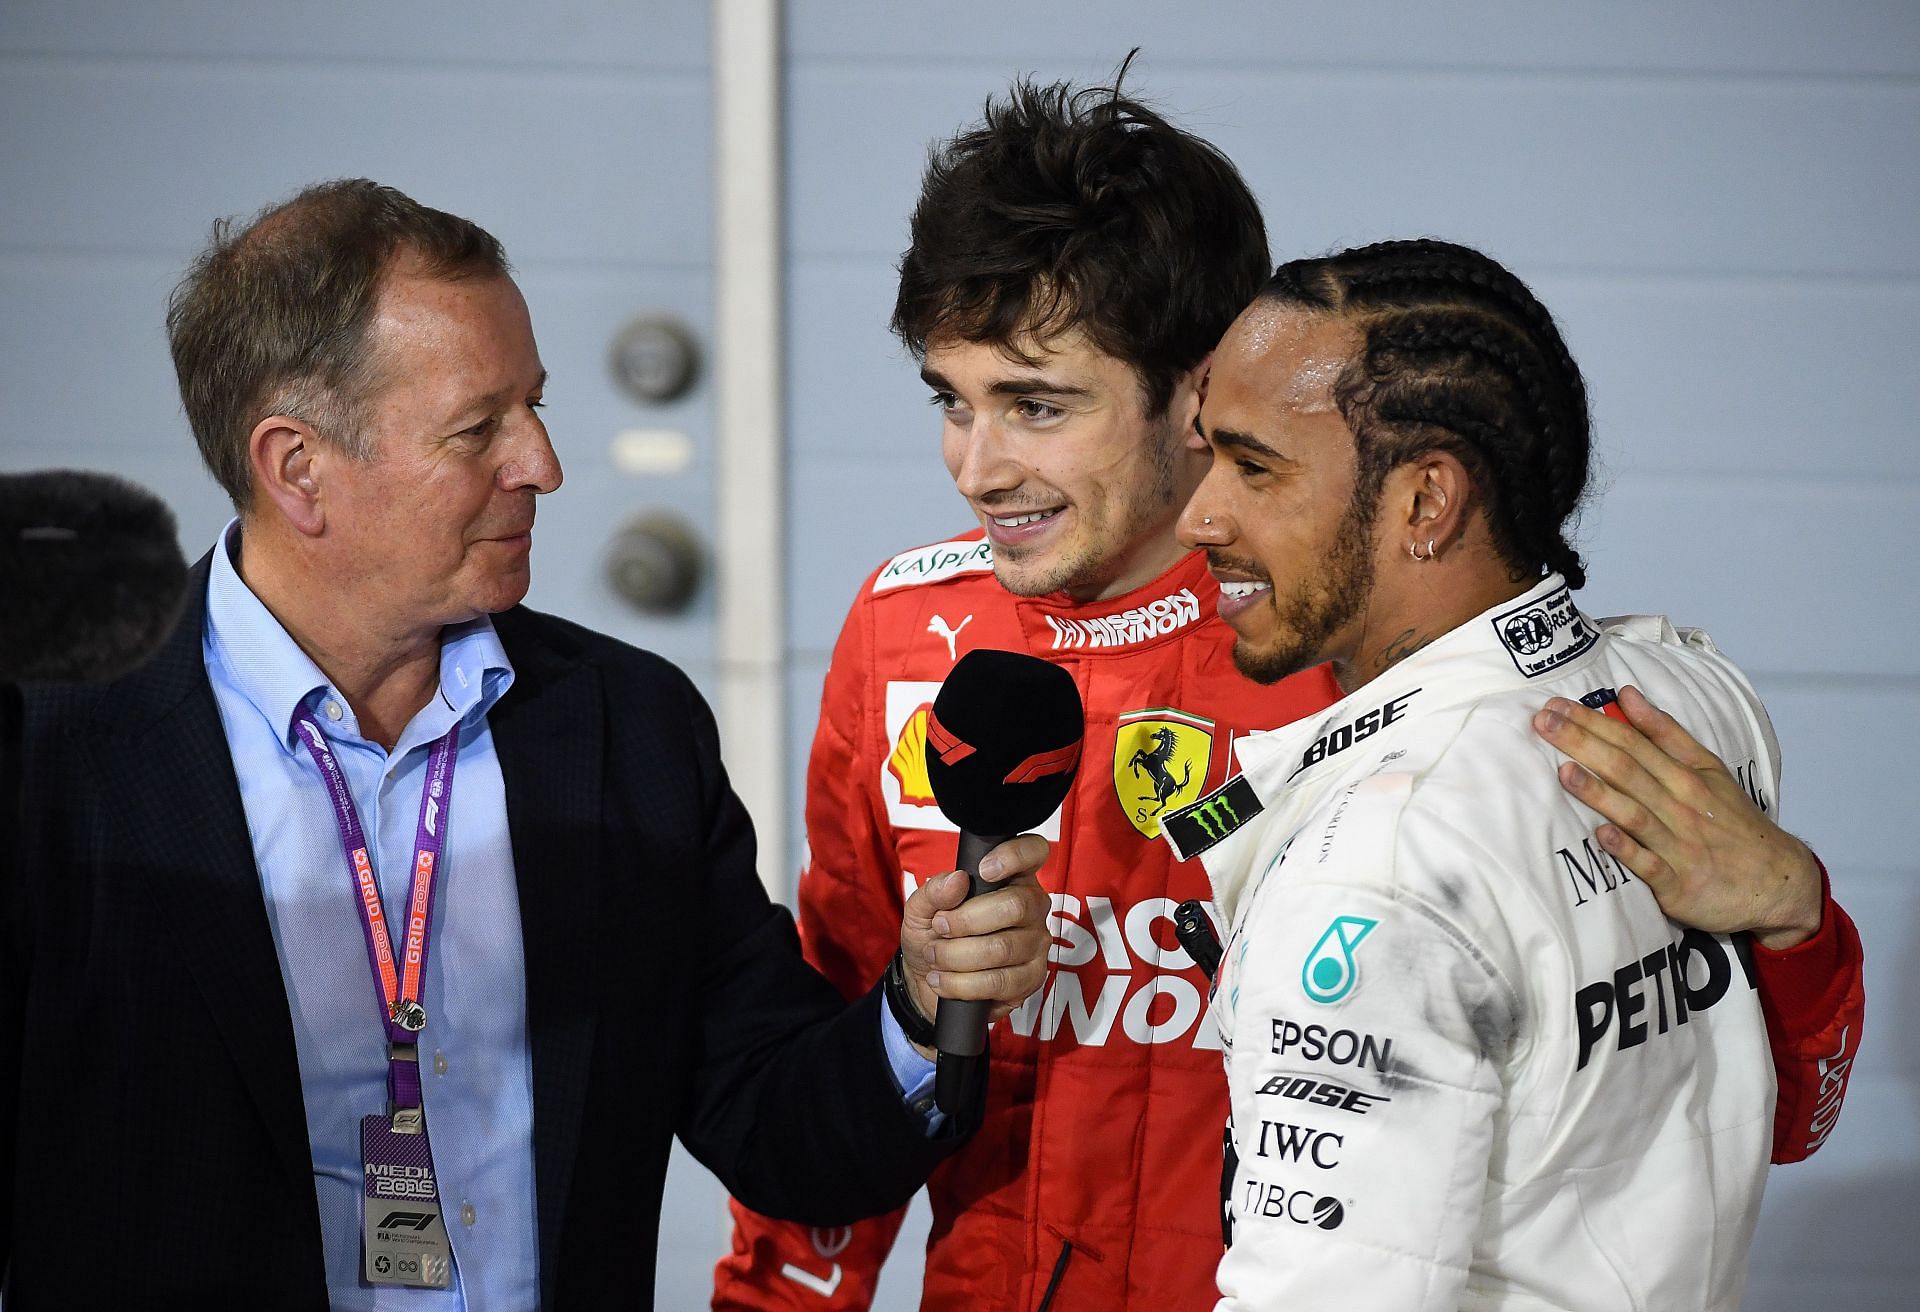 F1 Grand Prix of Bahrain 2019 - Martin Brundle talks to Charles Leclerc and Lewis Hamilton in 2019.